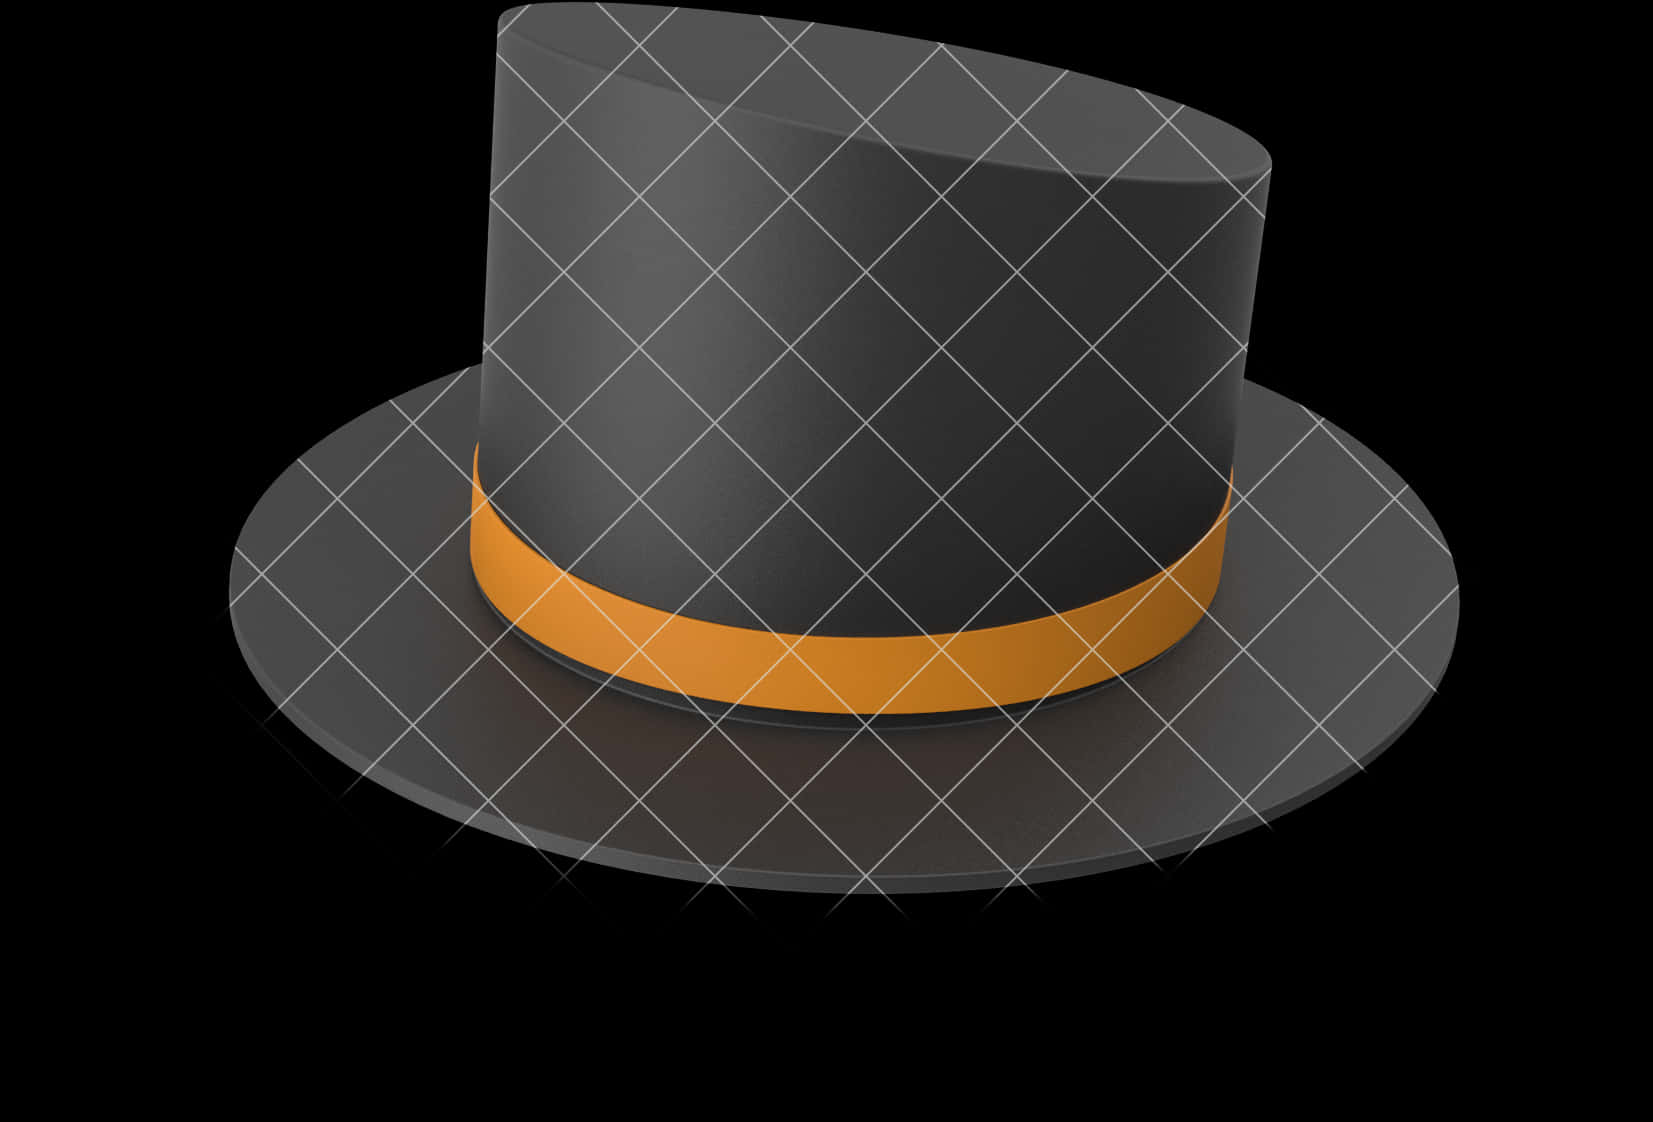 A Black Hat With Orange Band